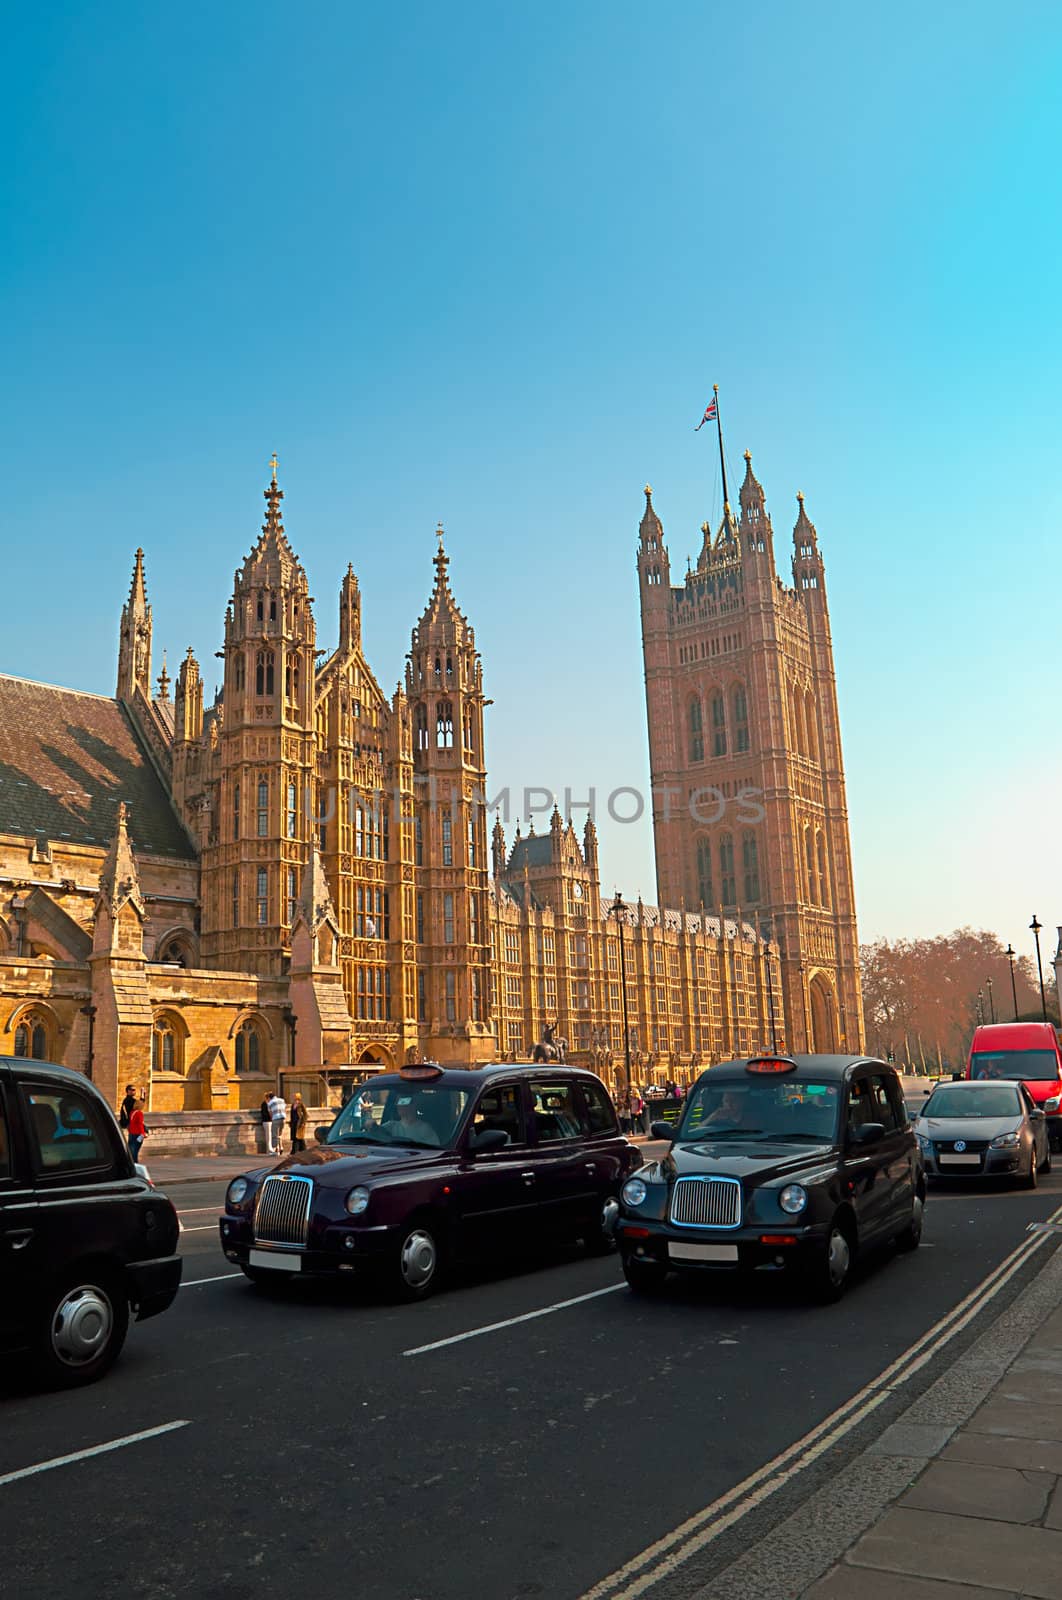 Westminster - Houses of Parliament in London and london's iconic black cabs are a symbol of the city.